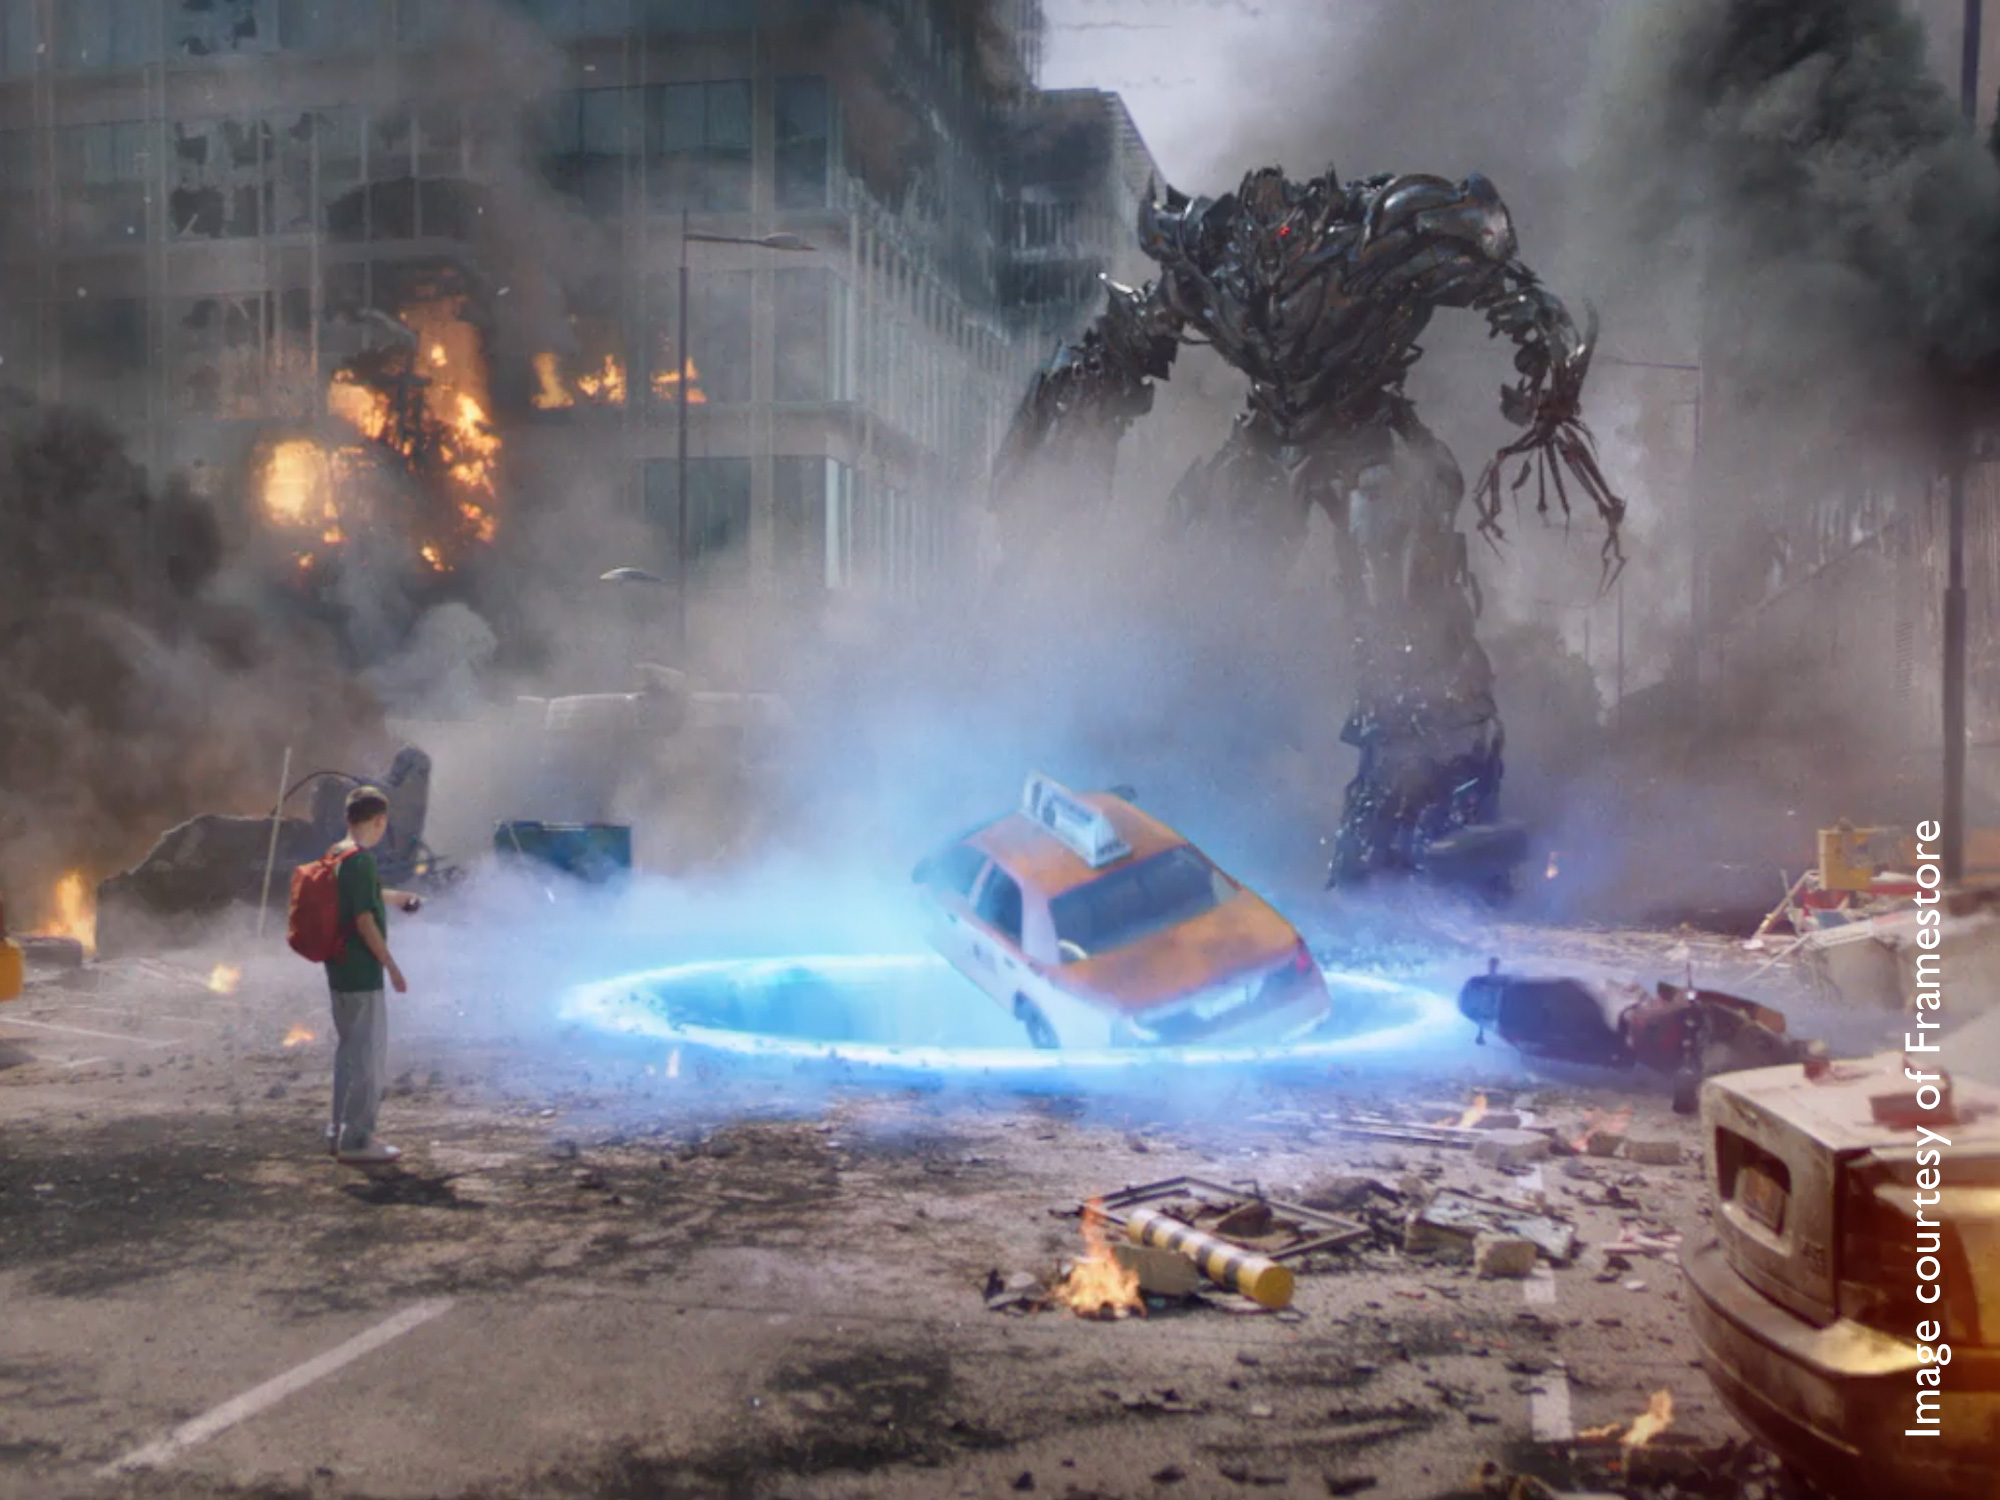 Apocalyptic film scene of a taxi falling into a hole, menacing robot and city buildings on fire